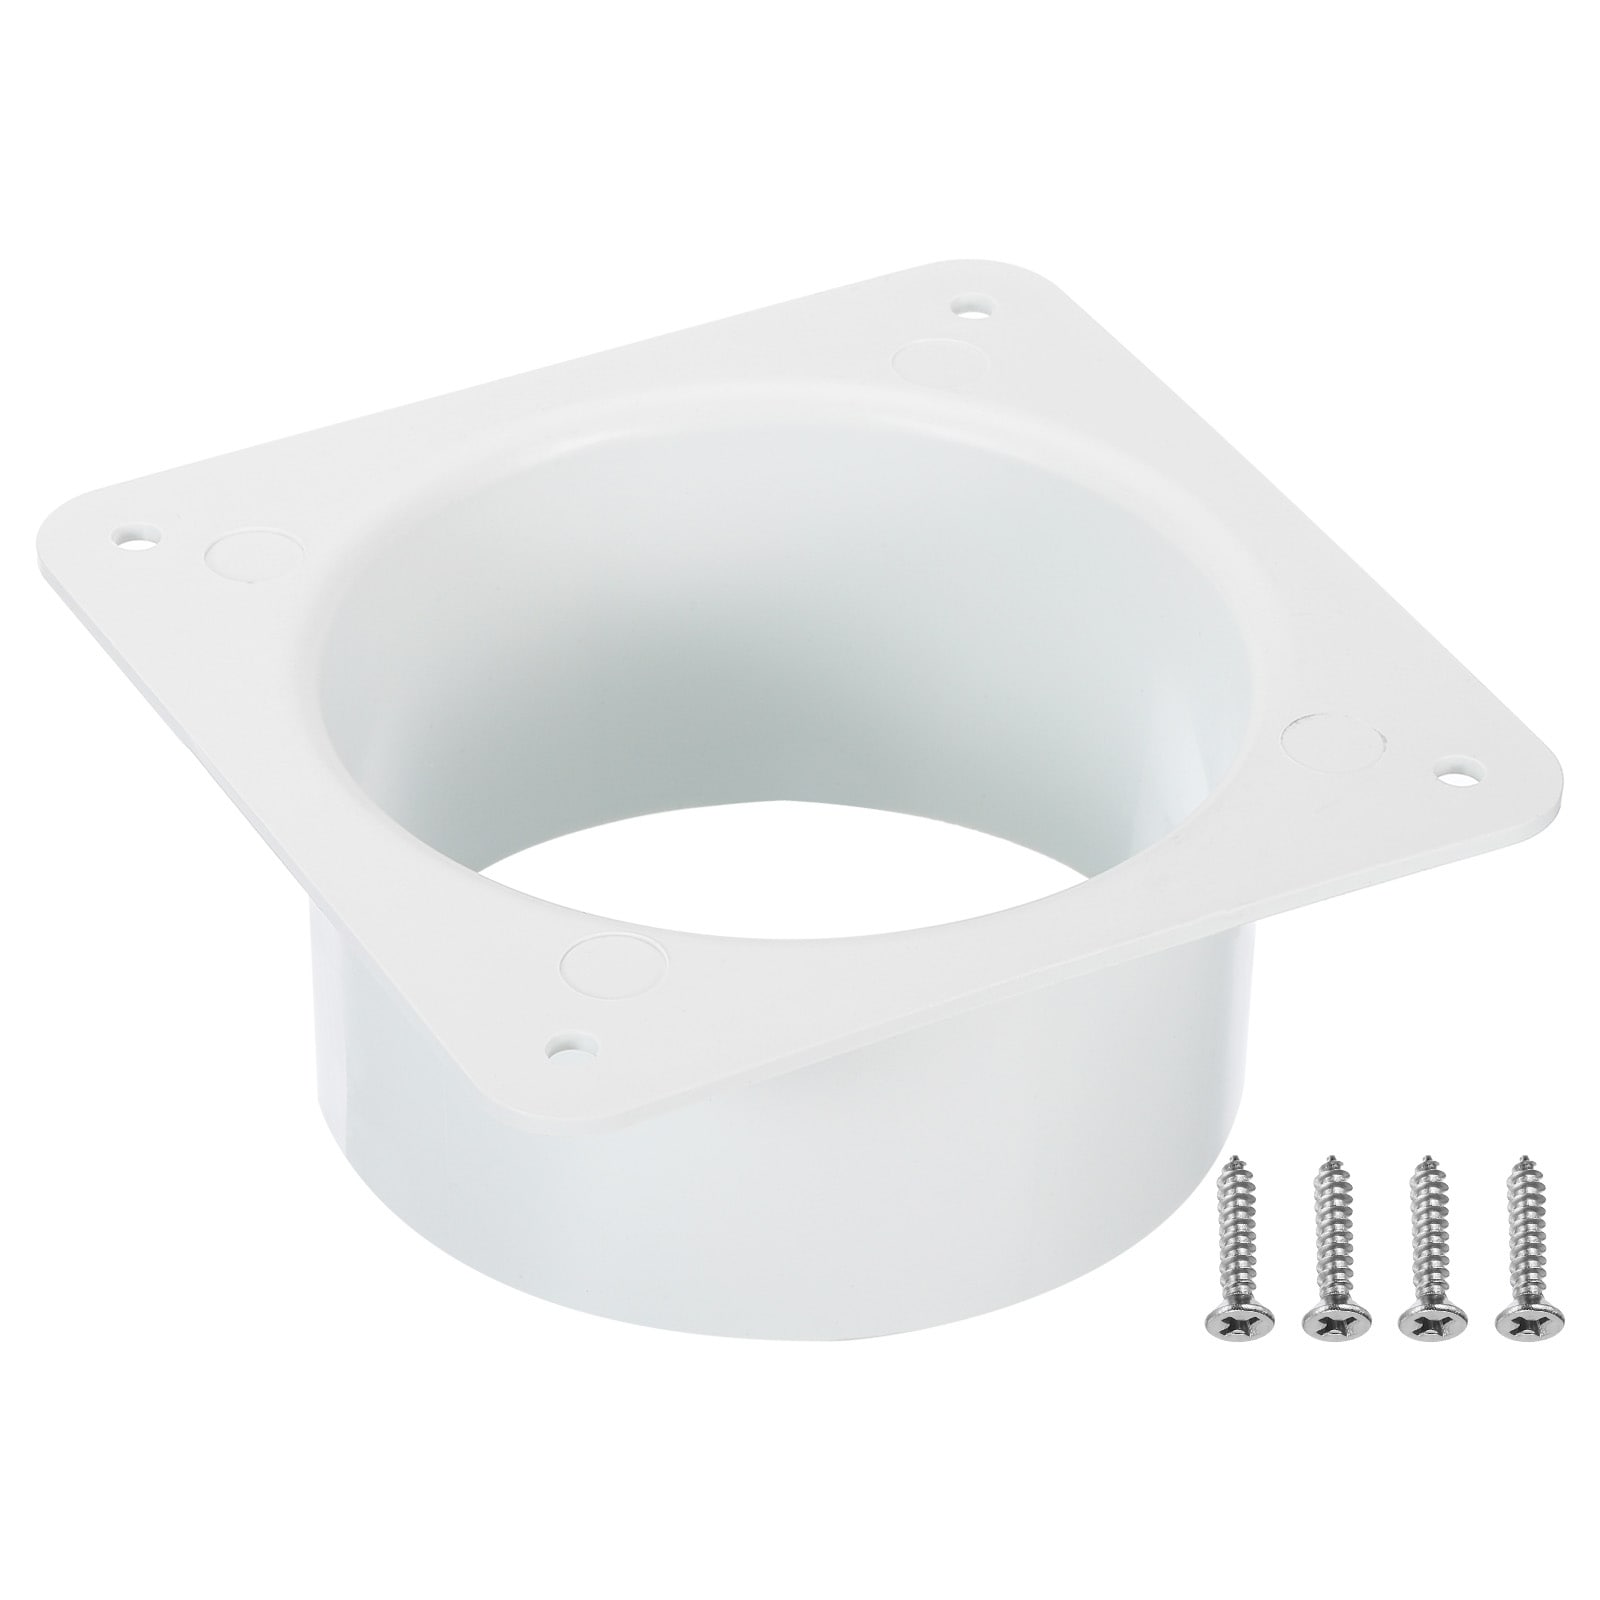 4 Inch Duct Connector Flange Dryer Vent Wall Plate Ducting Plate White -  Black - Bed Bath & Beyond - 37847542